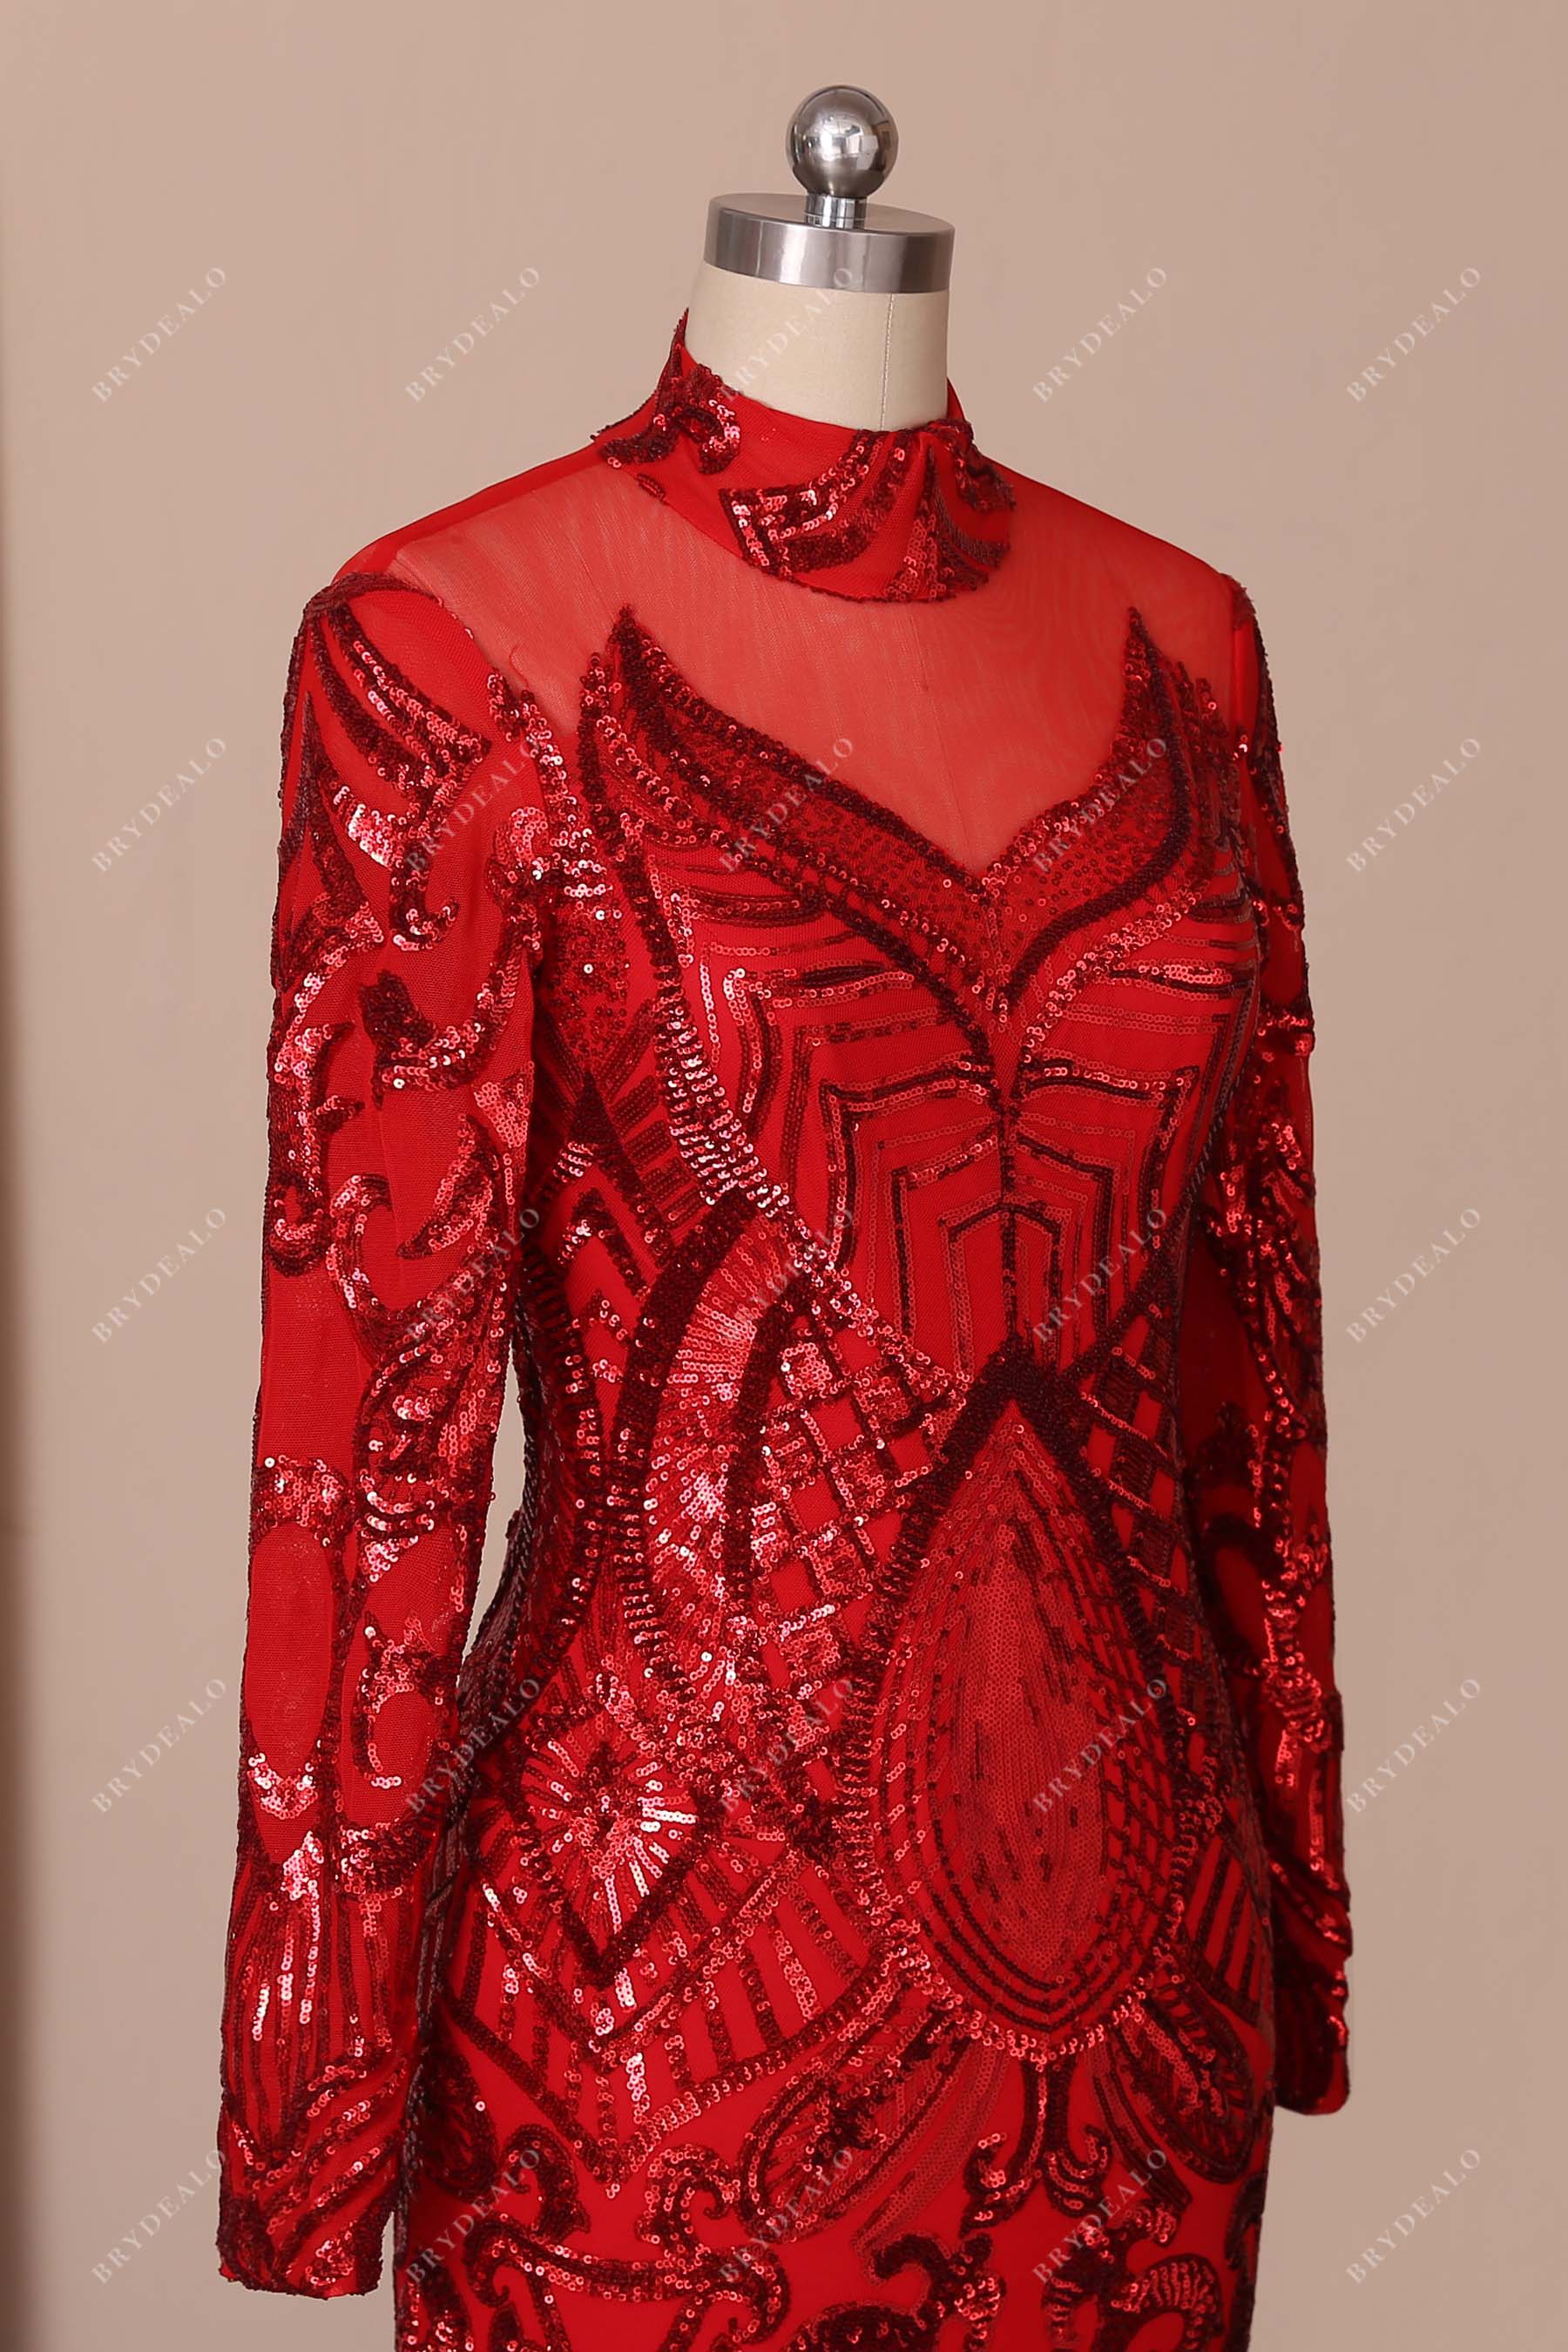 long sleeve red high neck prom dress